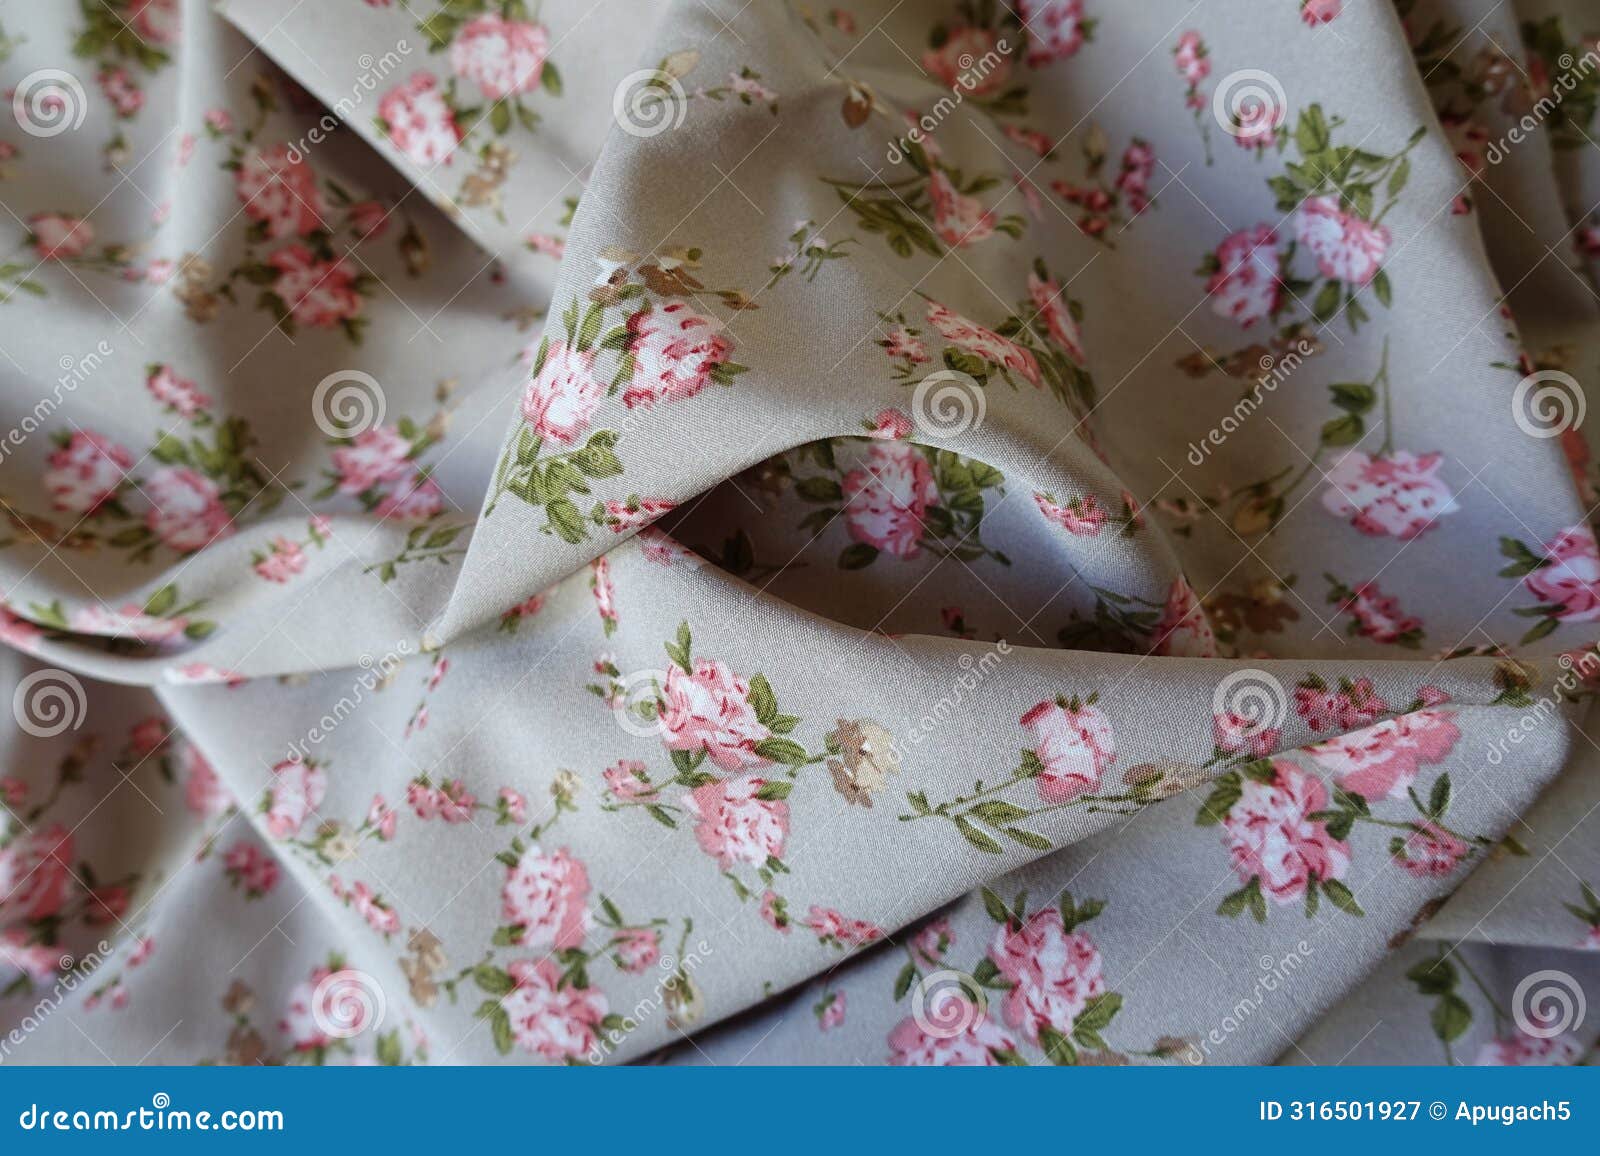 rumpled grey rayon fabric with old-fashioned floral print